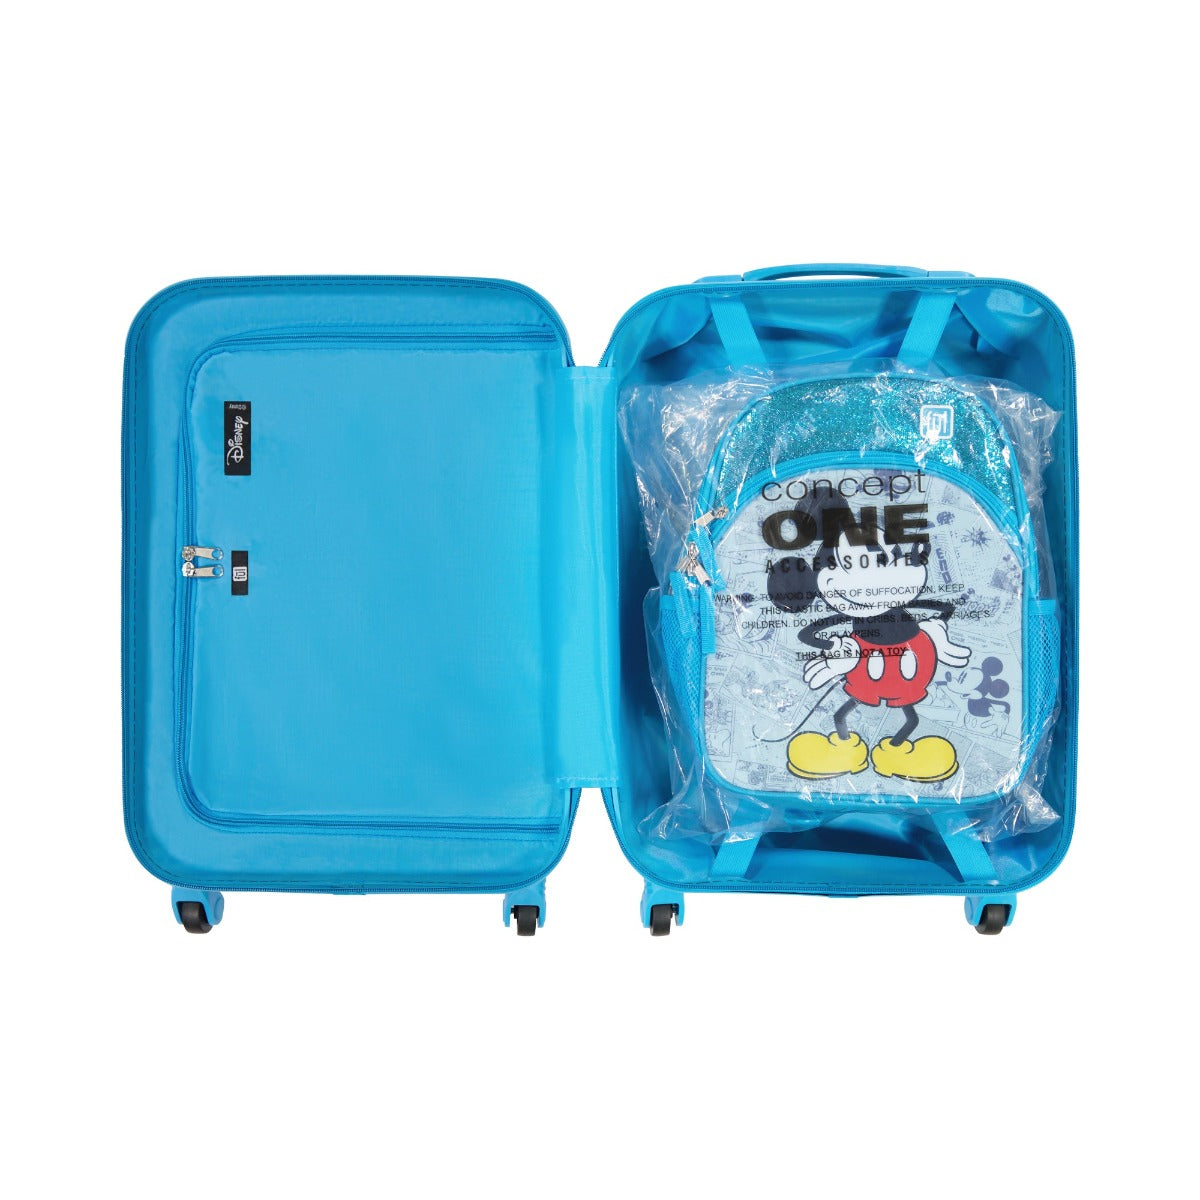 Blue Disney Heritage Mikey Mouse matching 2 piece set - 21" suitcase and 13" backpack for kids